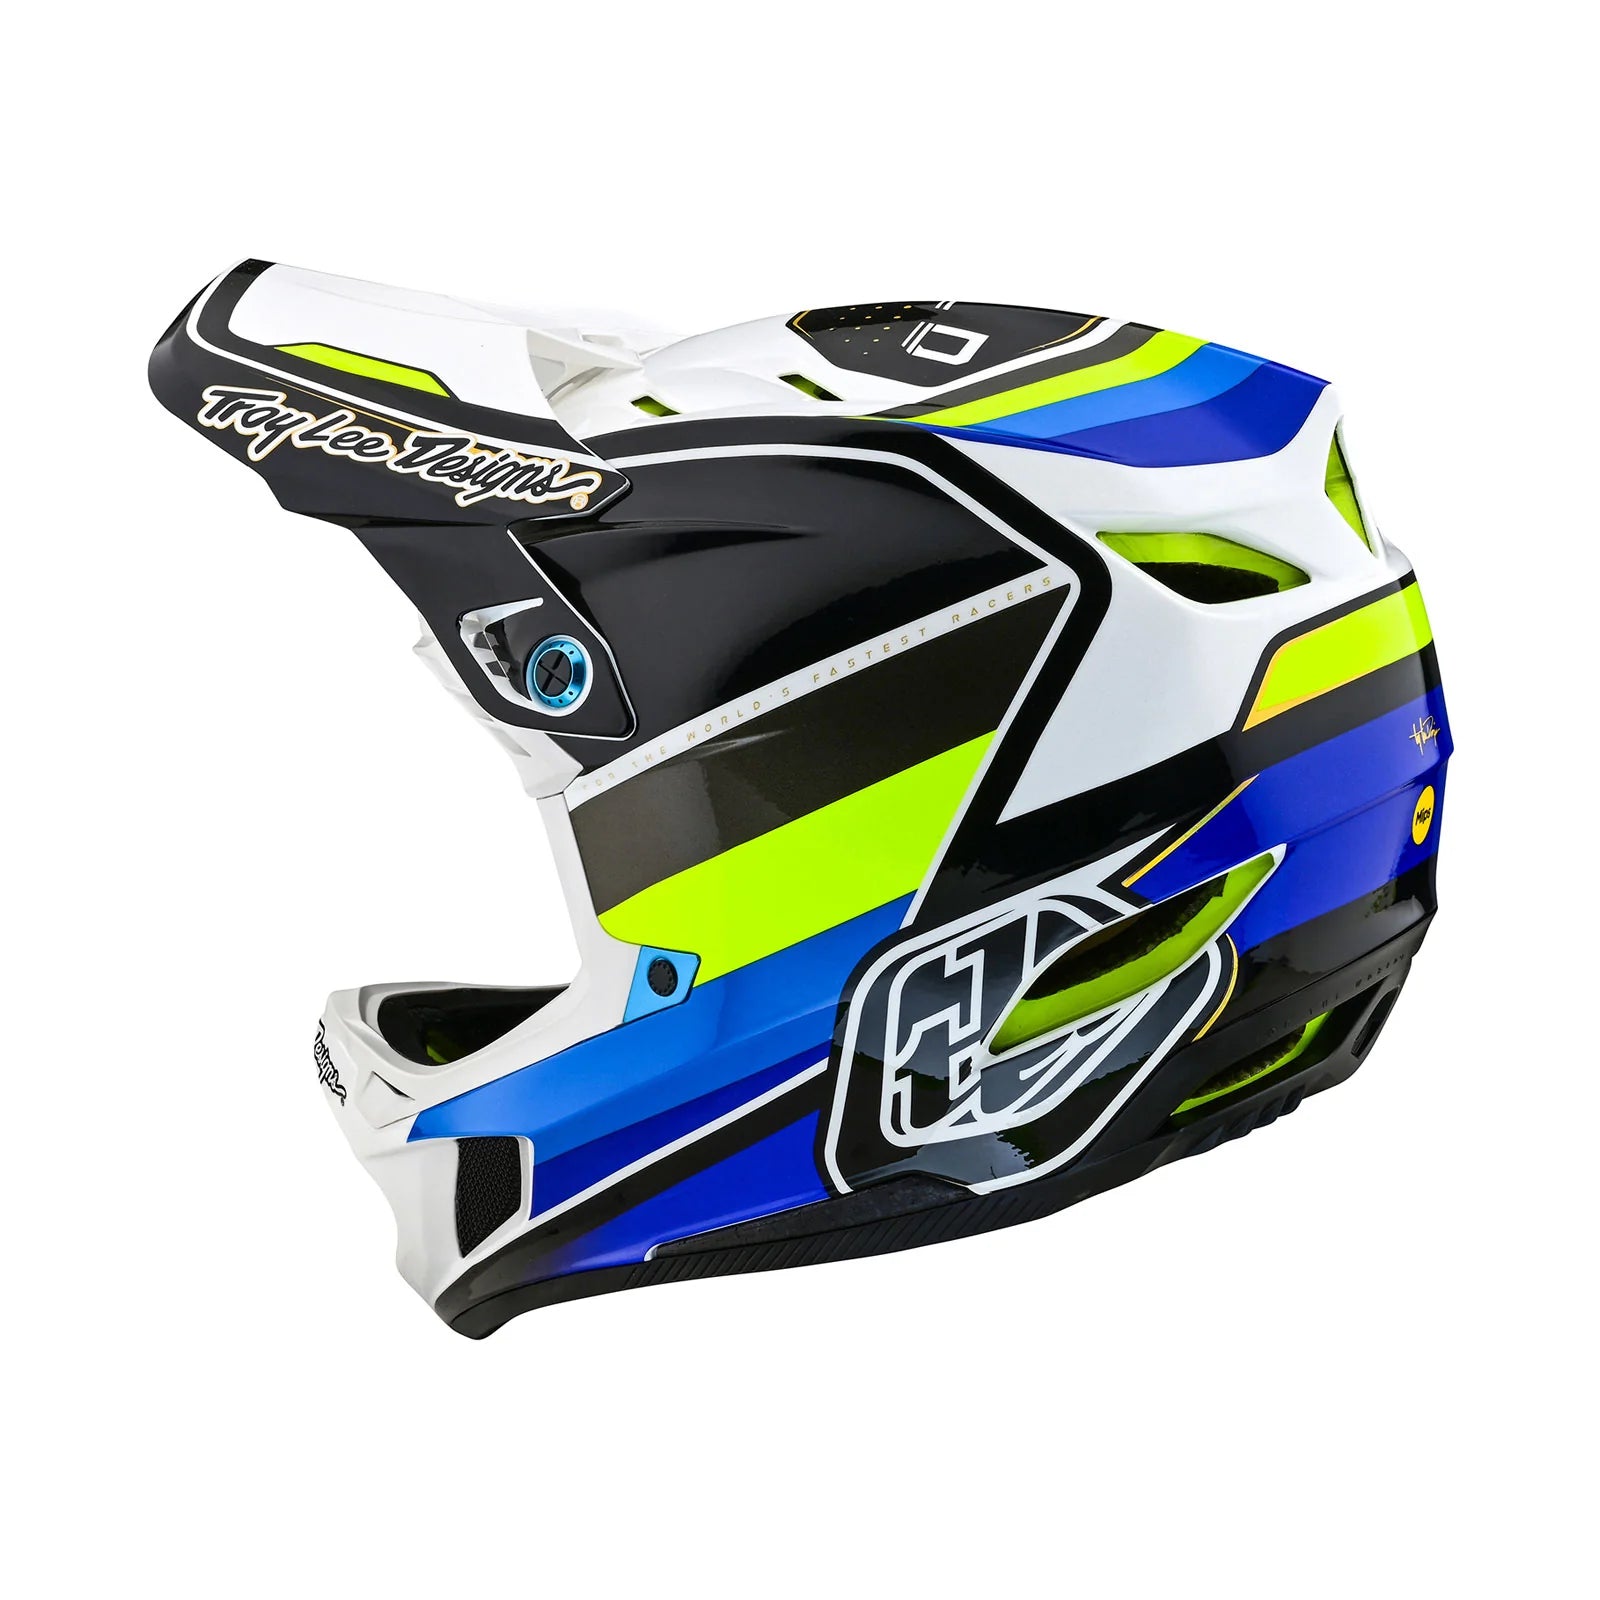 A TLD D4 AS Composite Helmet W/MIPS Reverb White with a blue and white design featuring the Mips protection system.